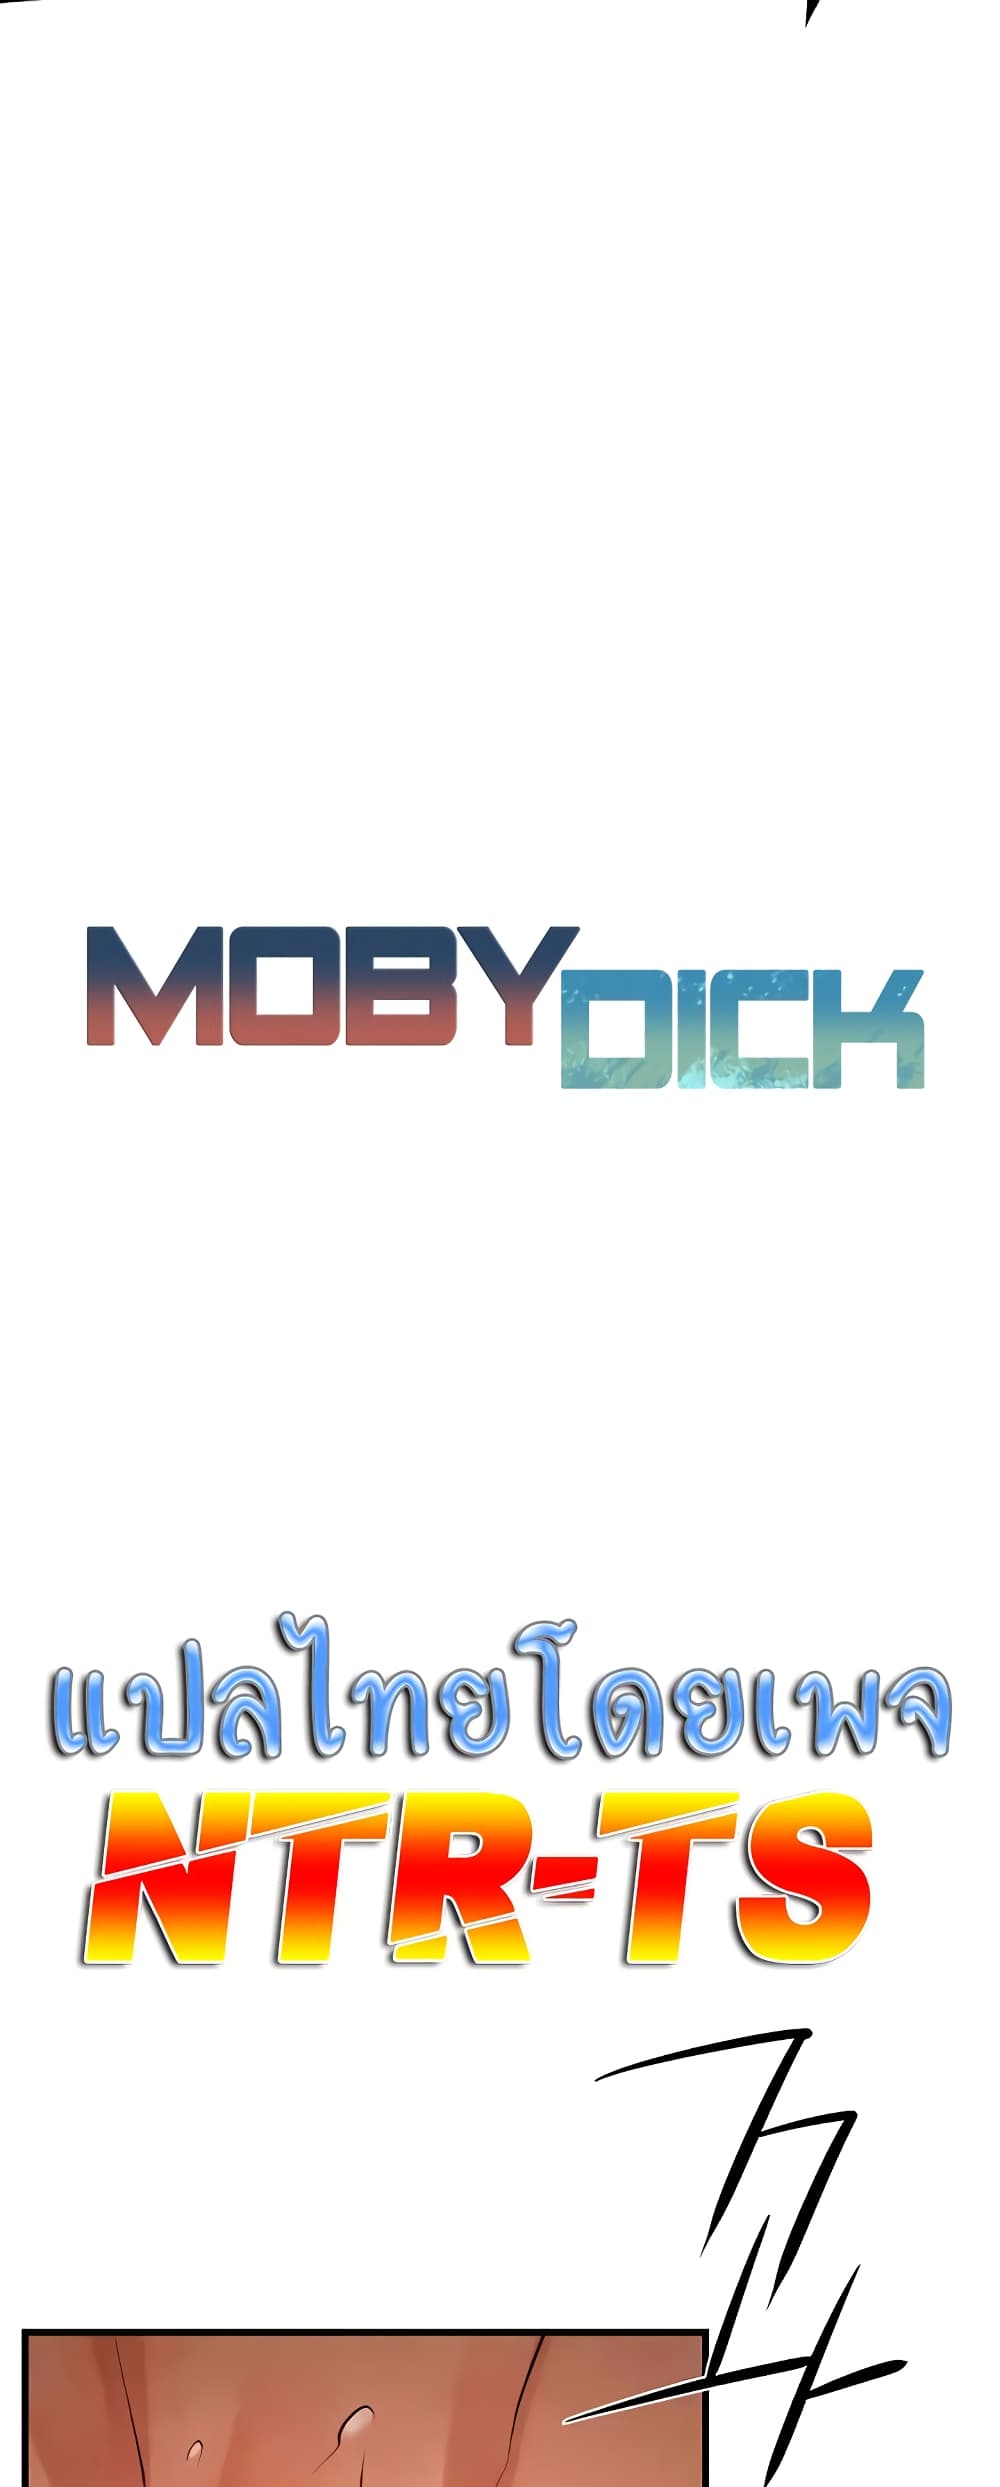 Moby Dick 17-17